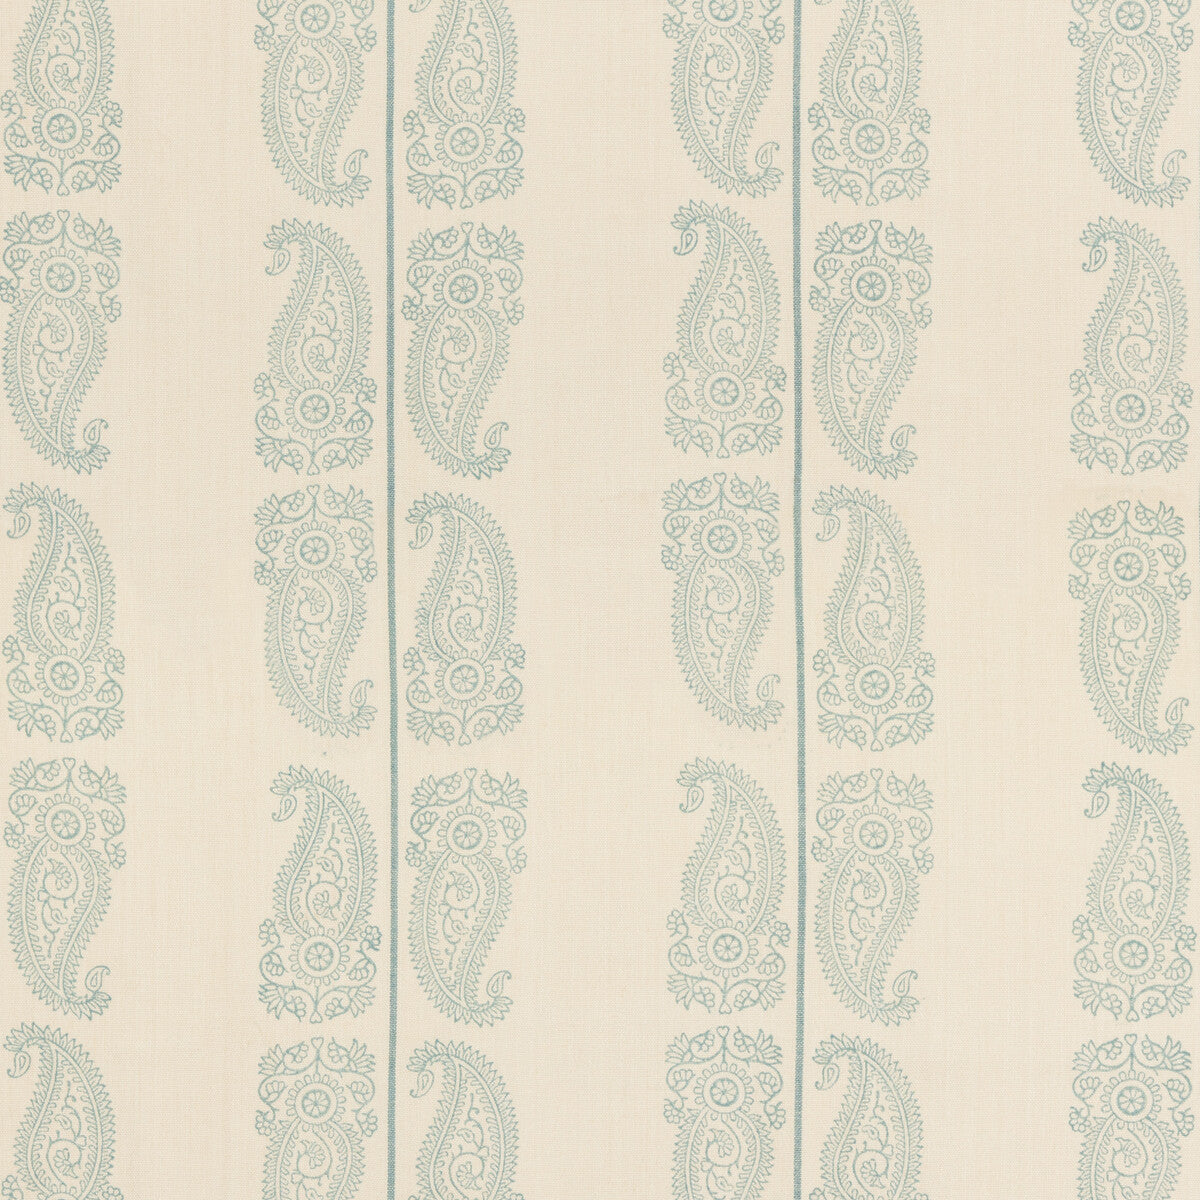 Cromer Paisley fabric in aqua color - pattern BP10796.1.0 - by G P &amp; J Baker in the Artisan II collection